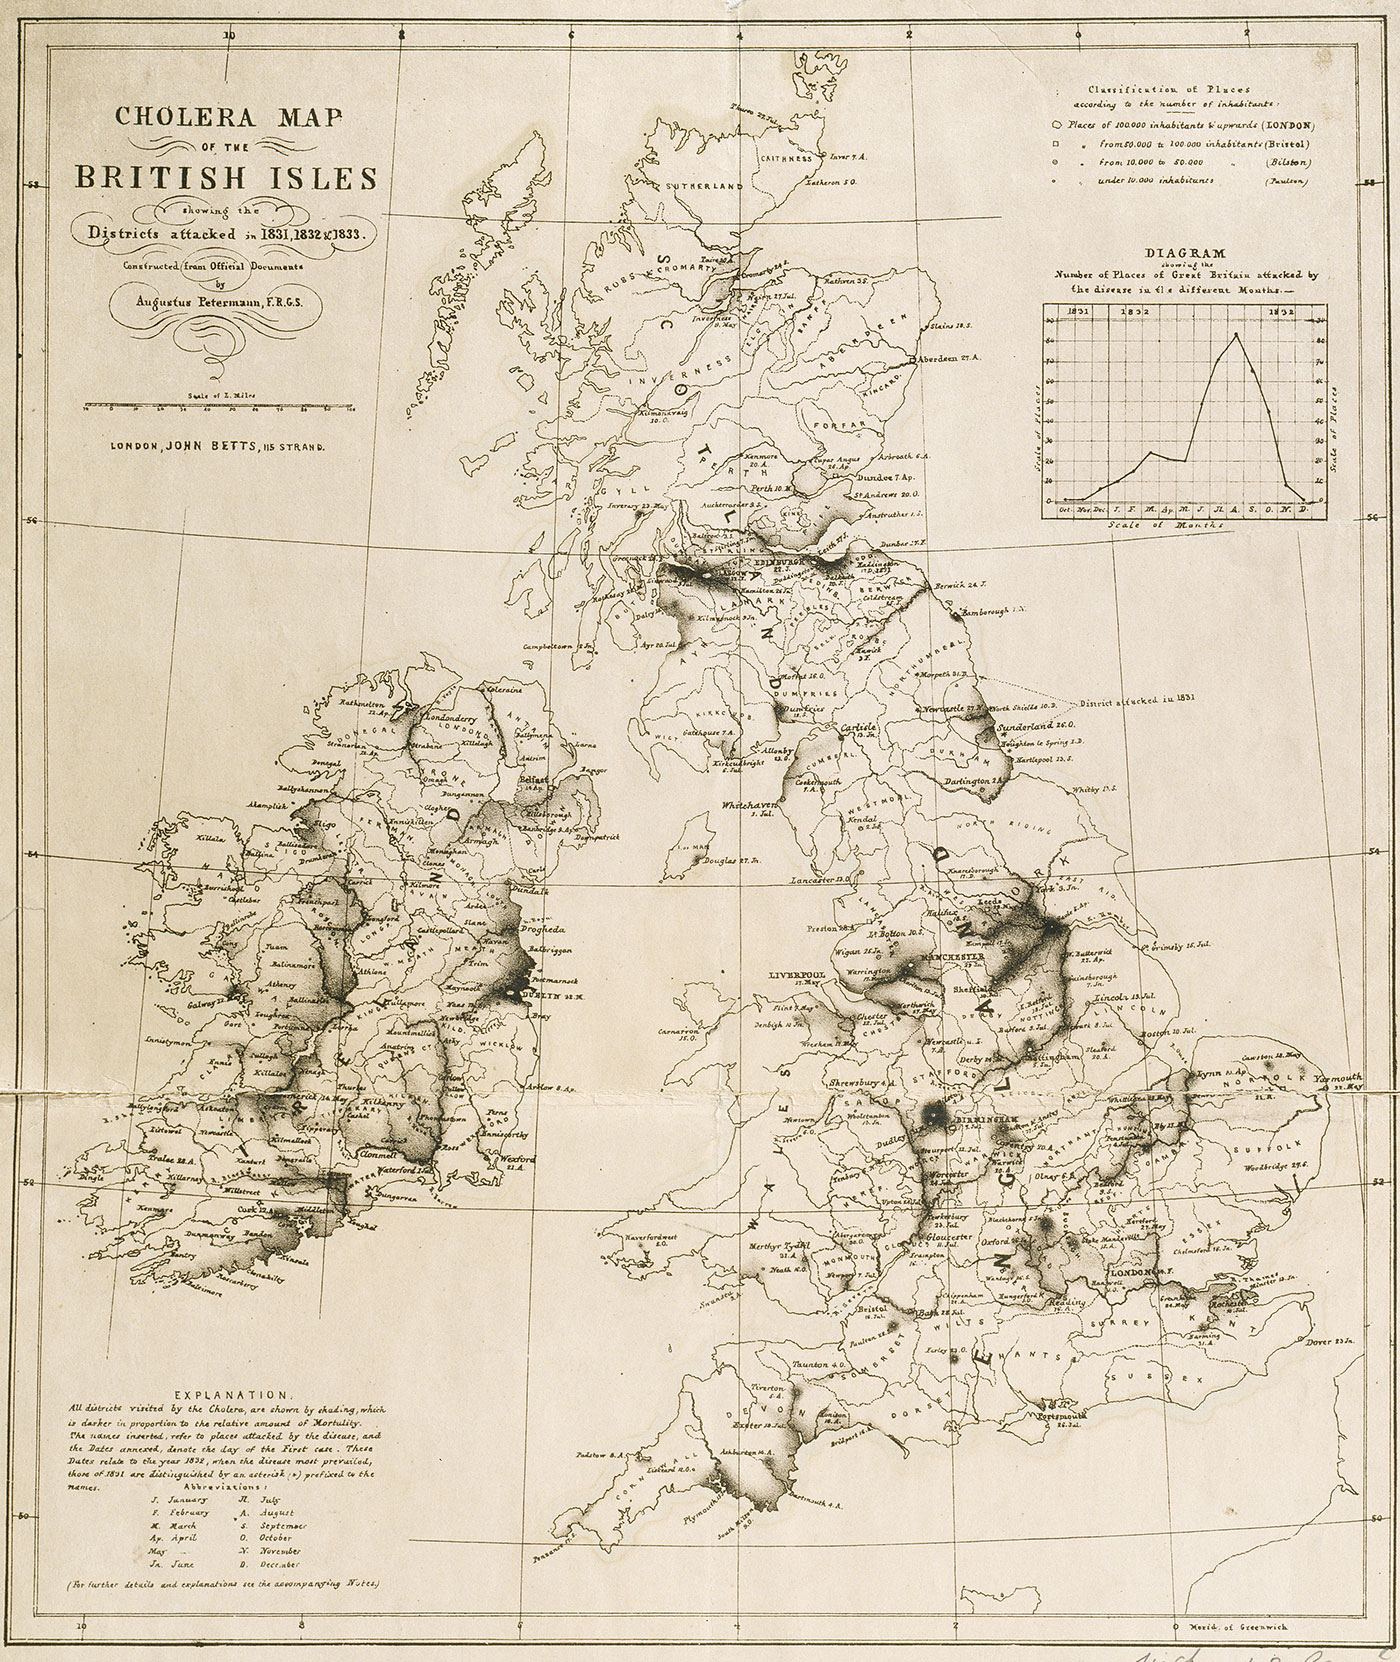 A map of Britain showing cases of Cholera